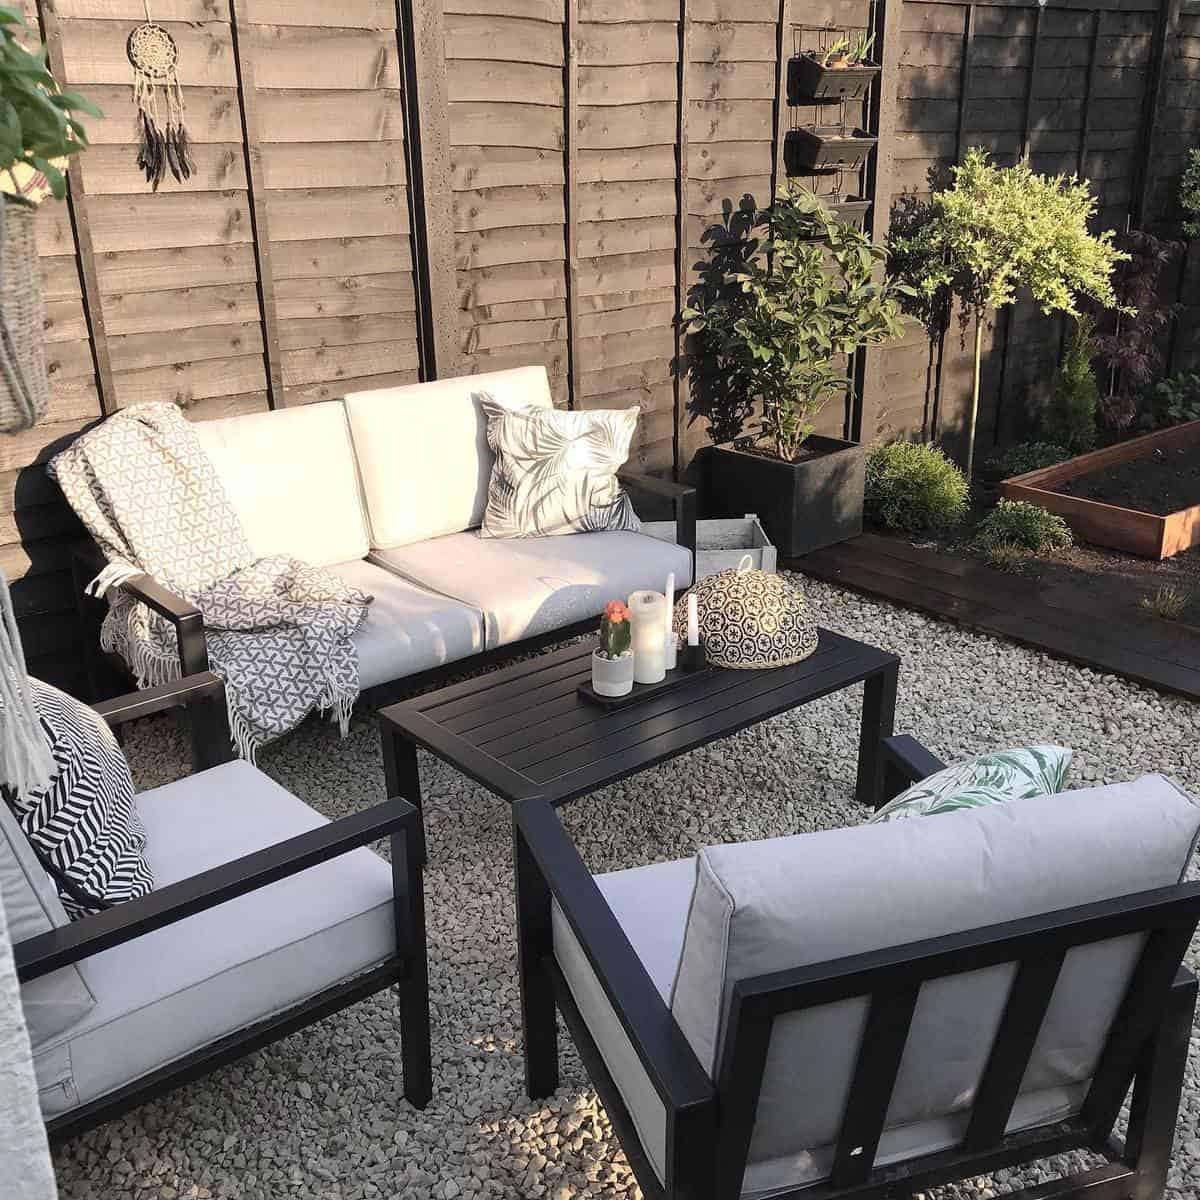 Patio decor tables and chairs